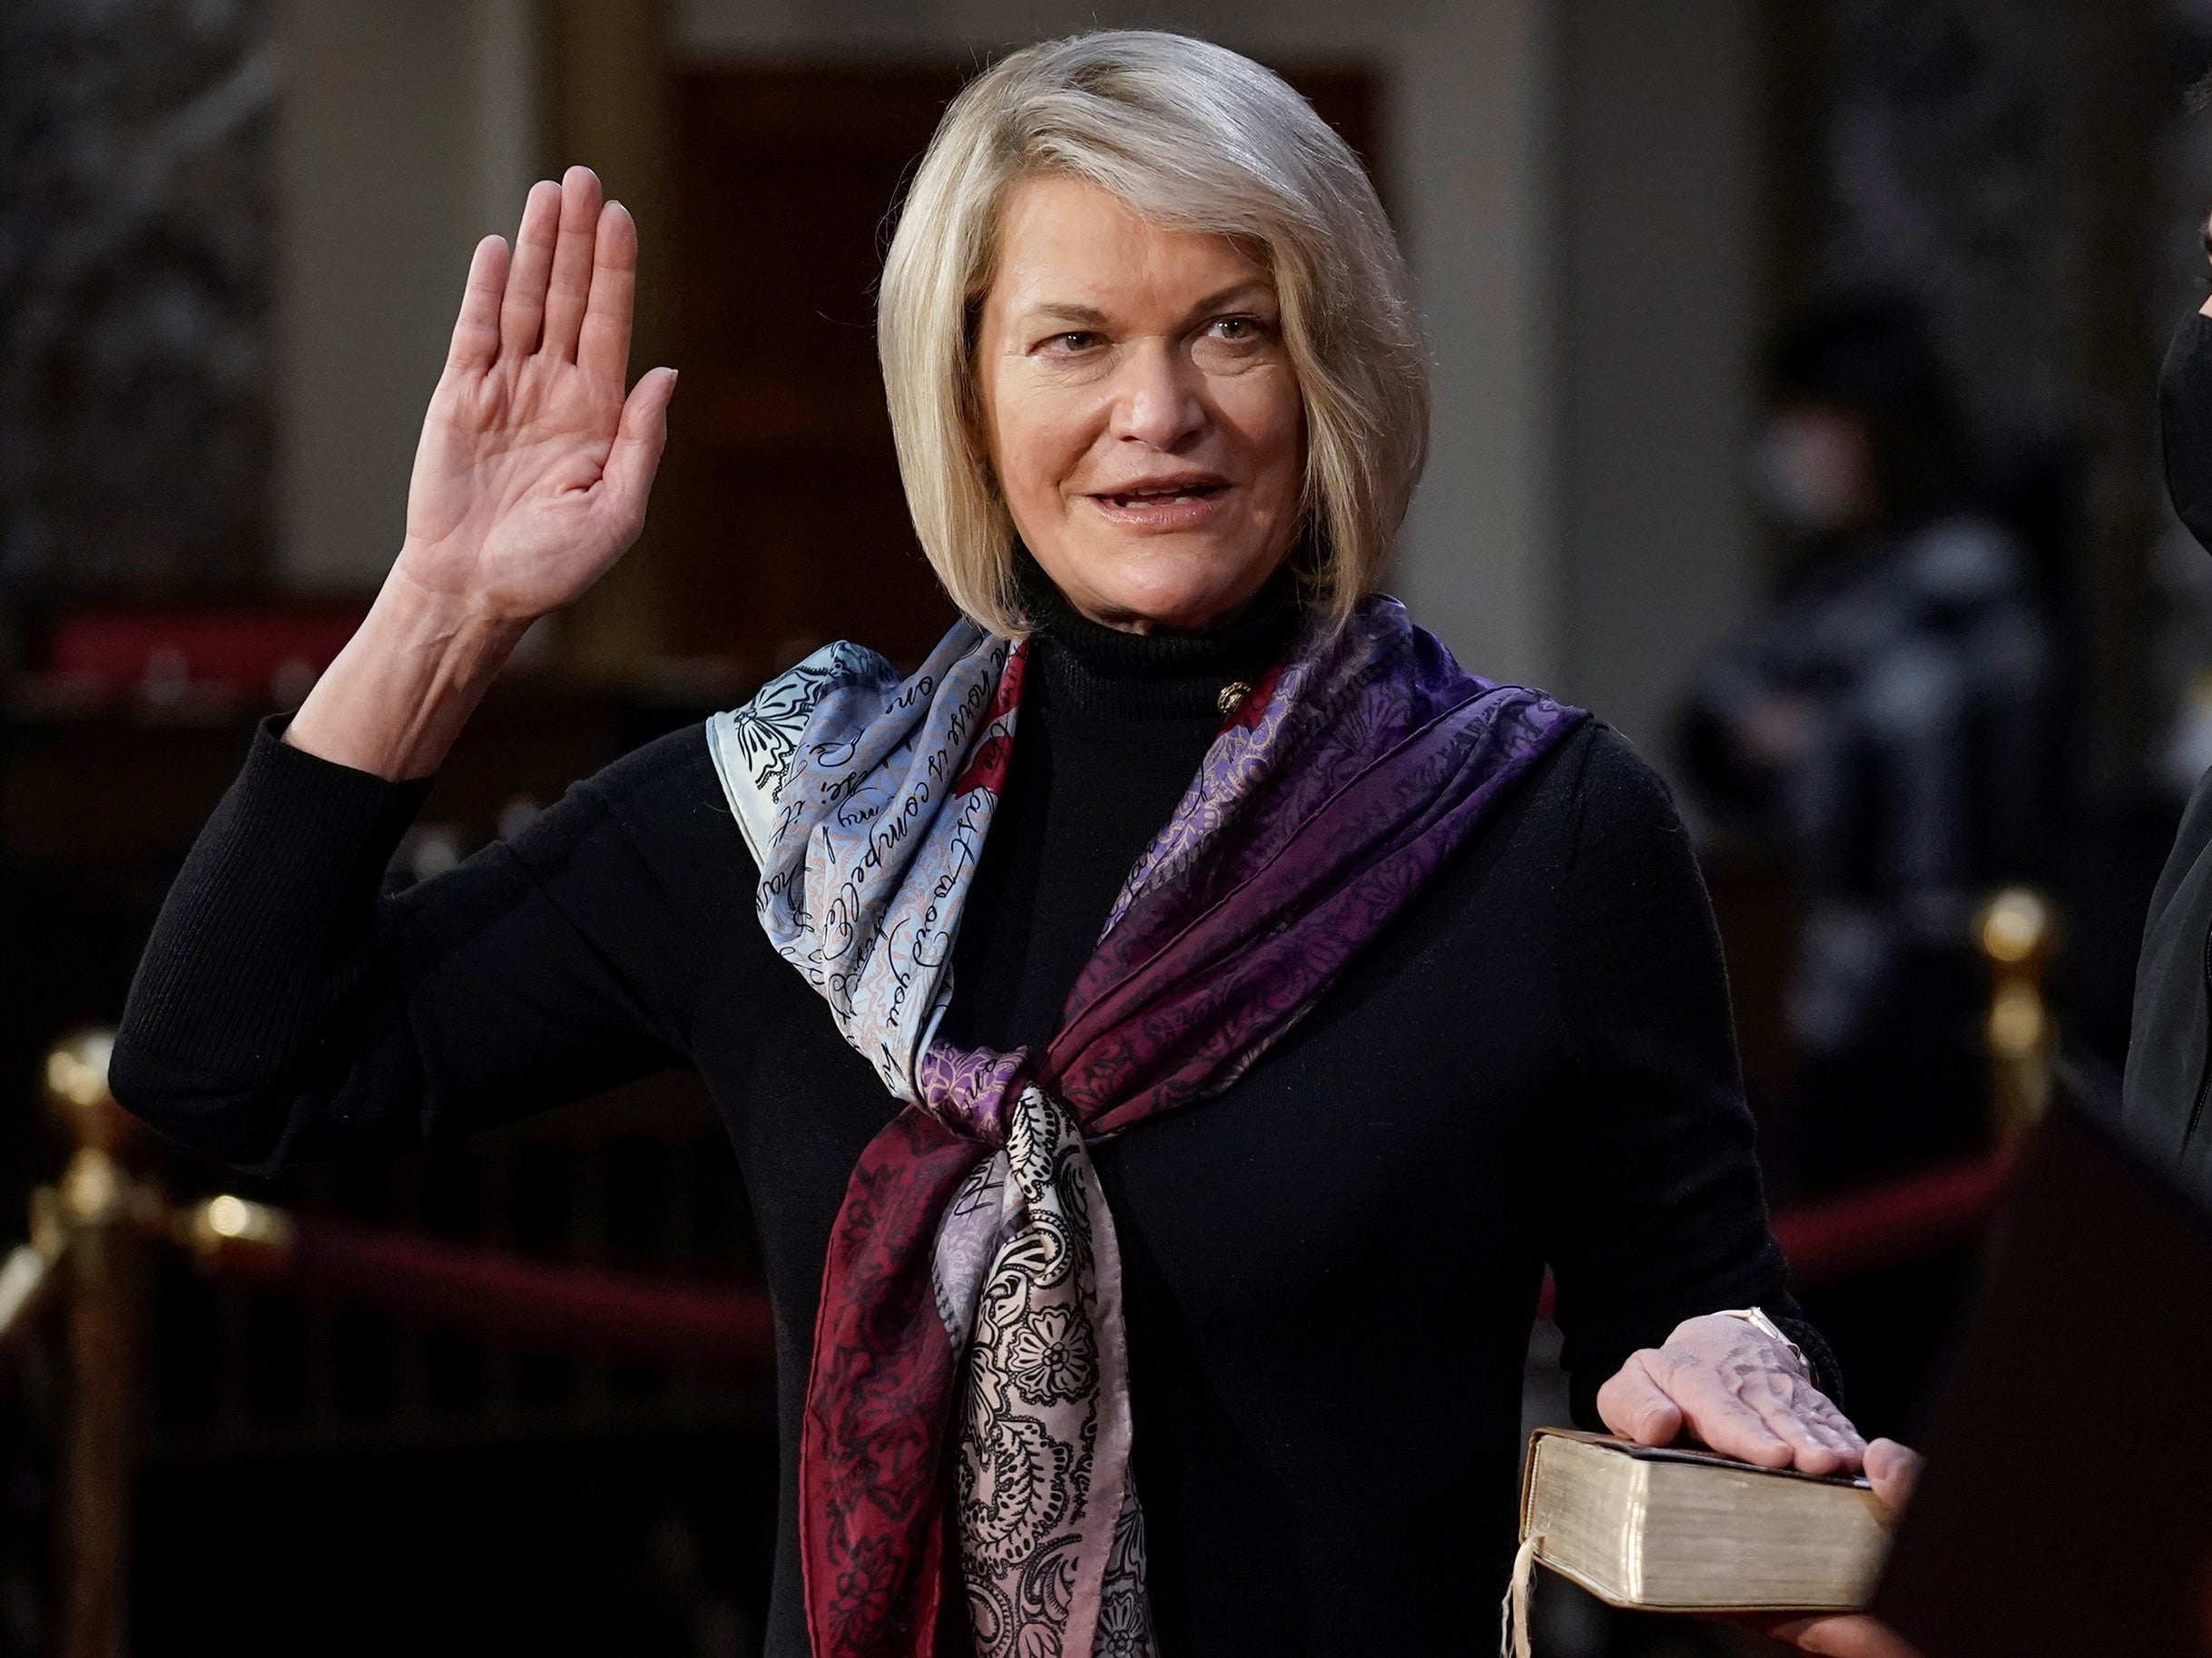 Senator Cynthia Lummis takes the oath of office during a mock swearing-in ceremony in the Old Senate Chamber at the Capitol on 3 January, 2021 in Washington, DC